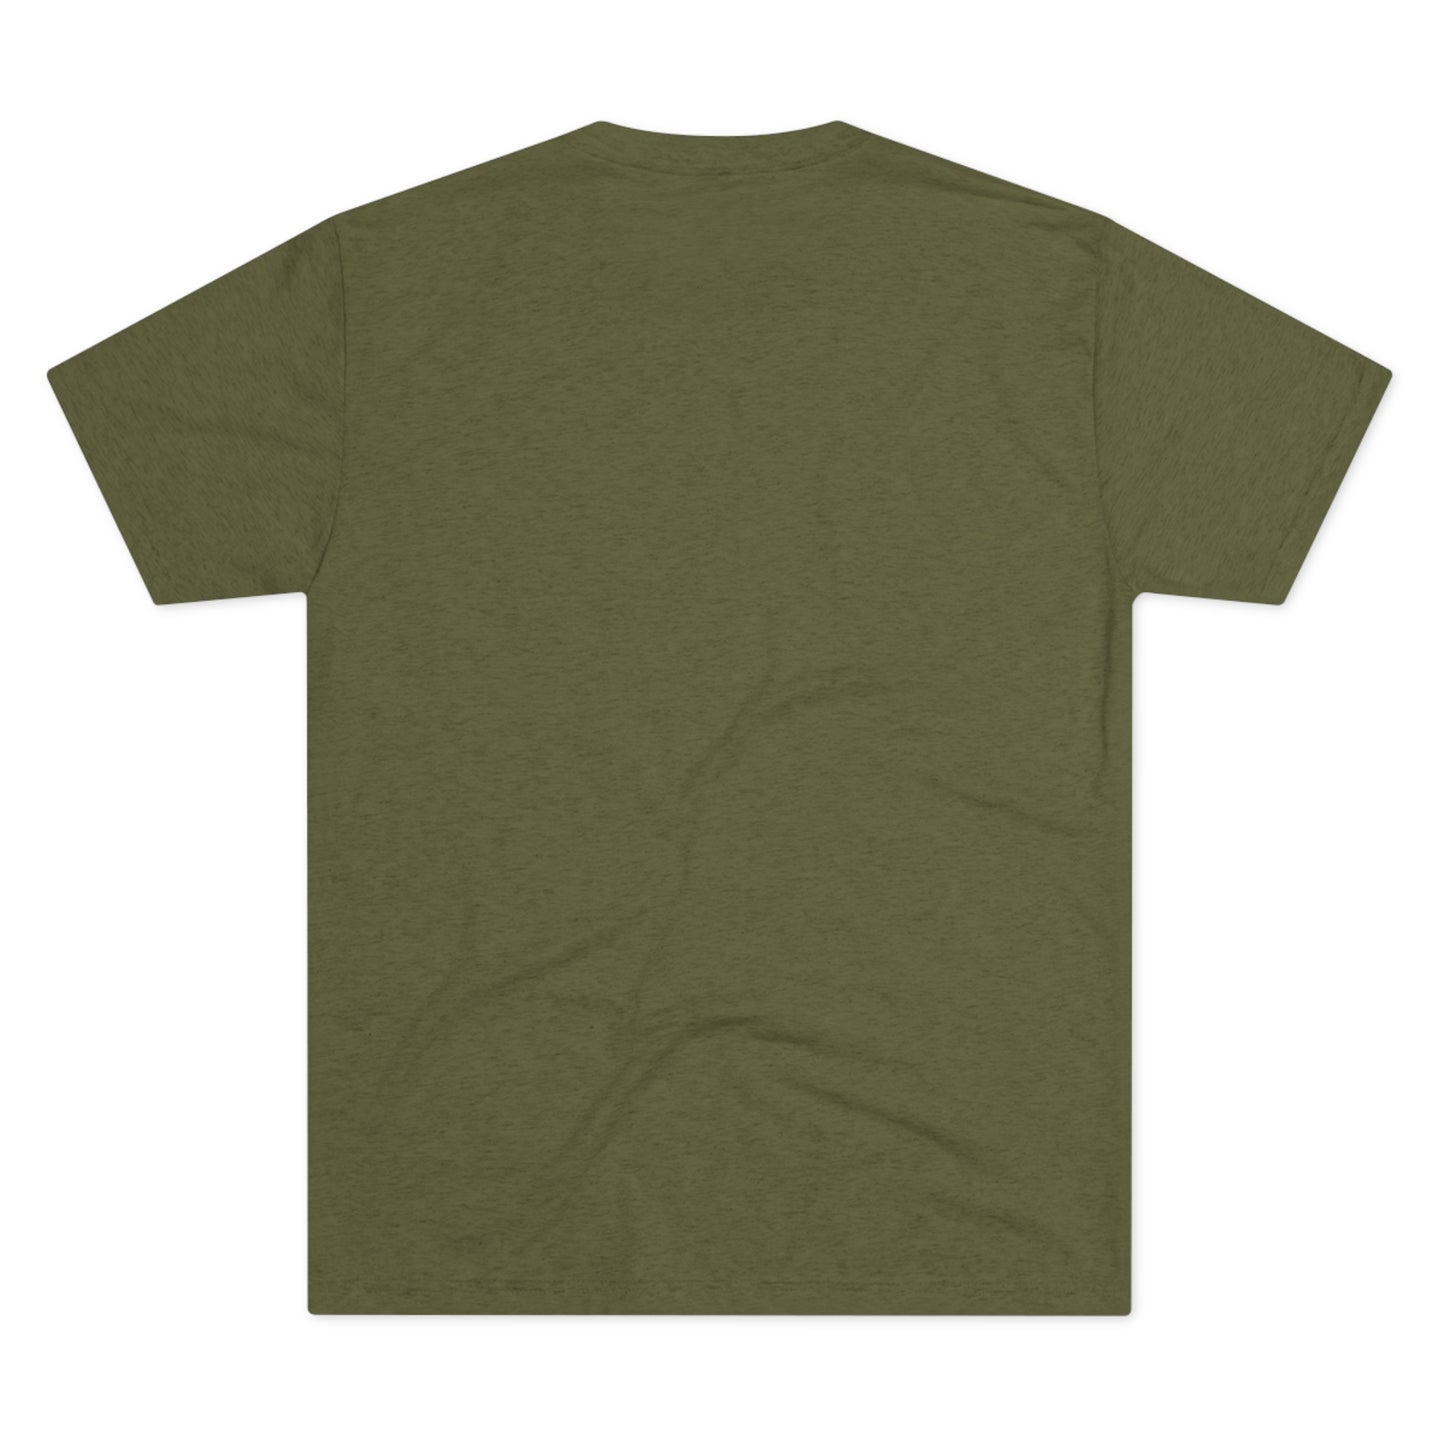 DH FREEDOM Tee Version 1 (Multiple Color Options)